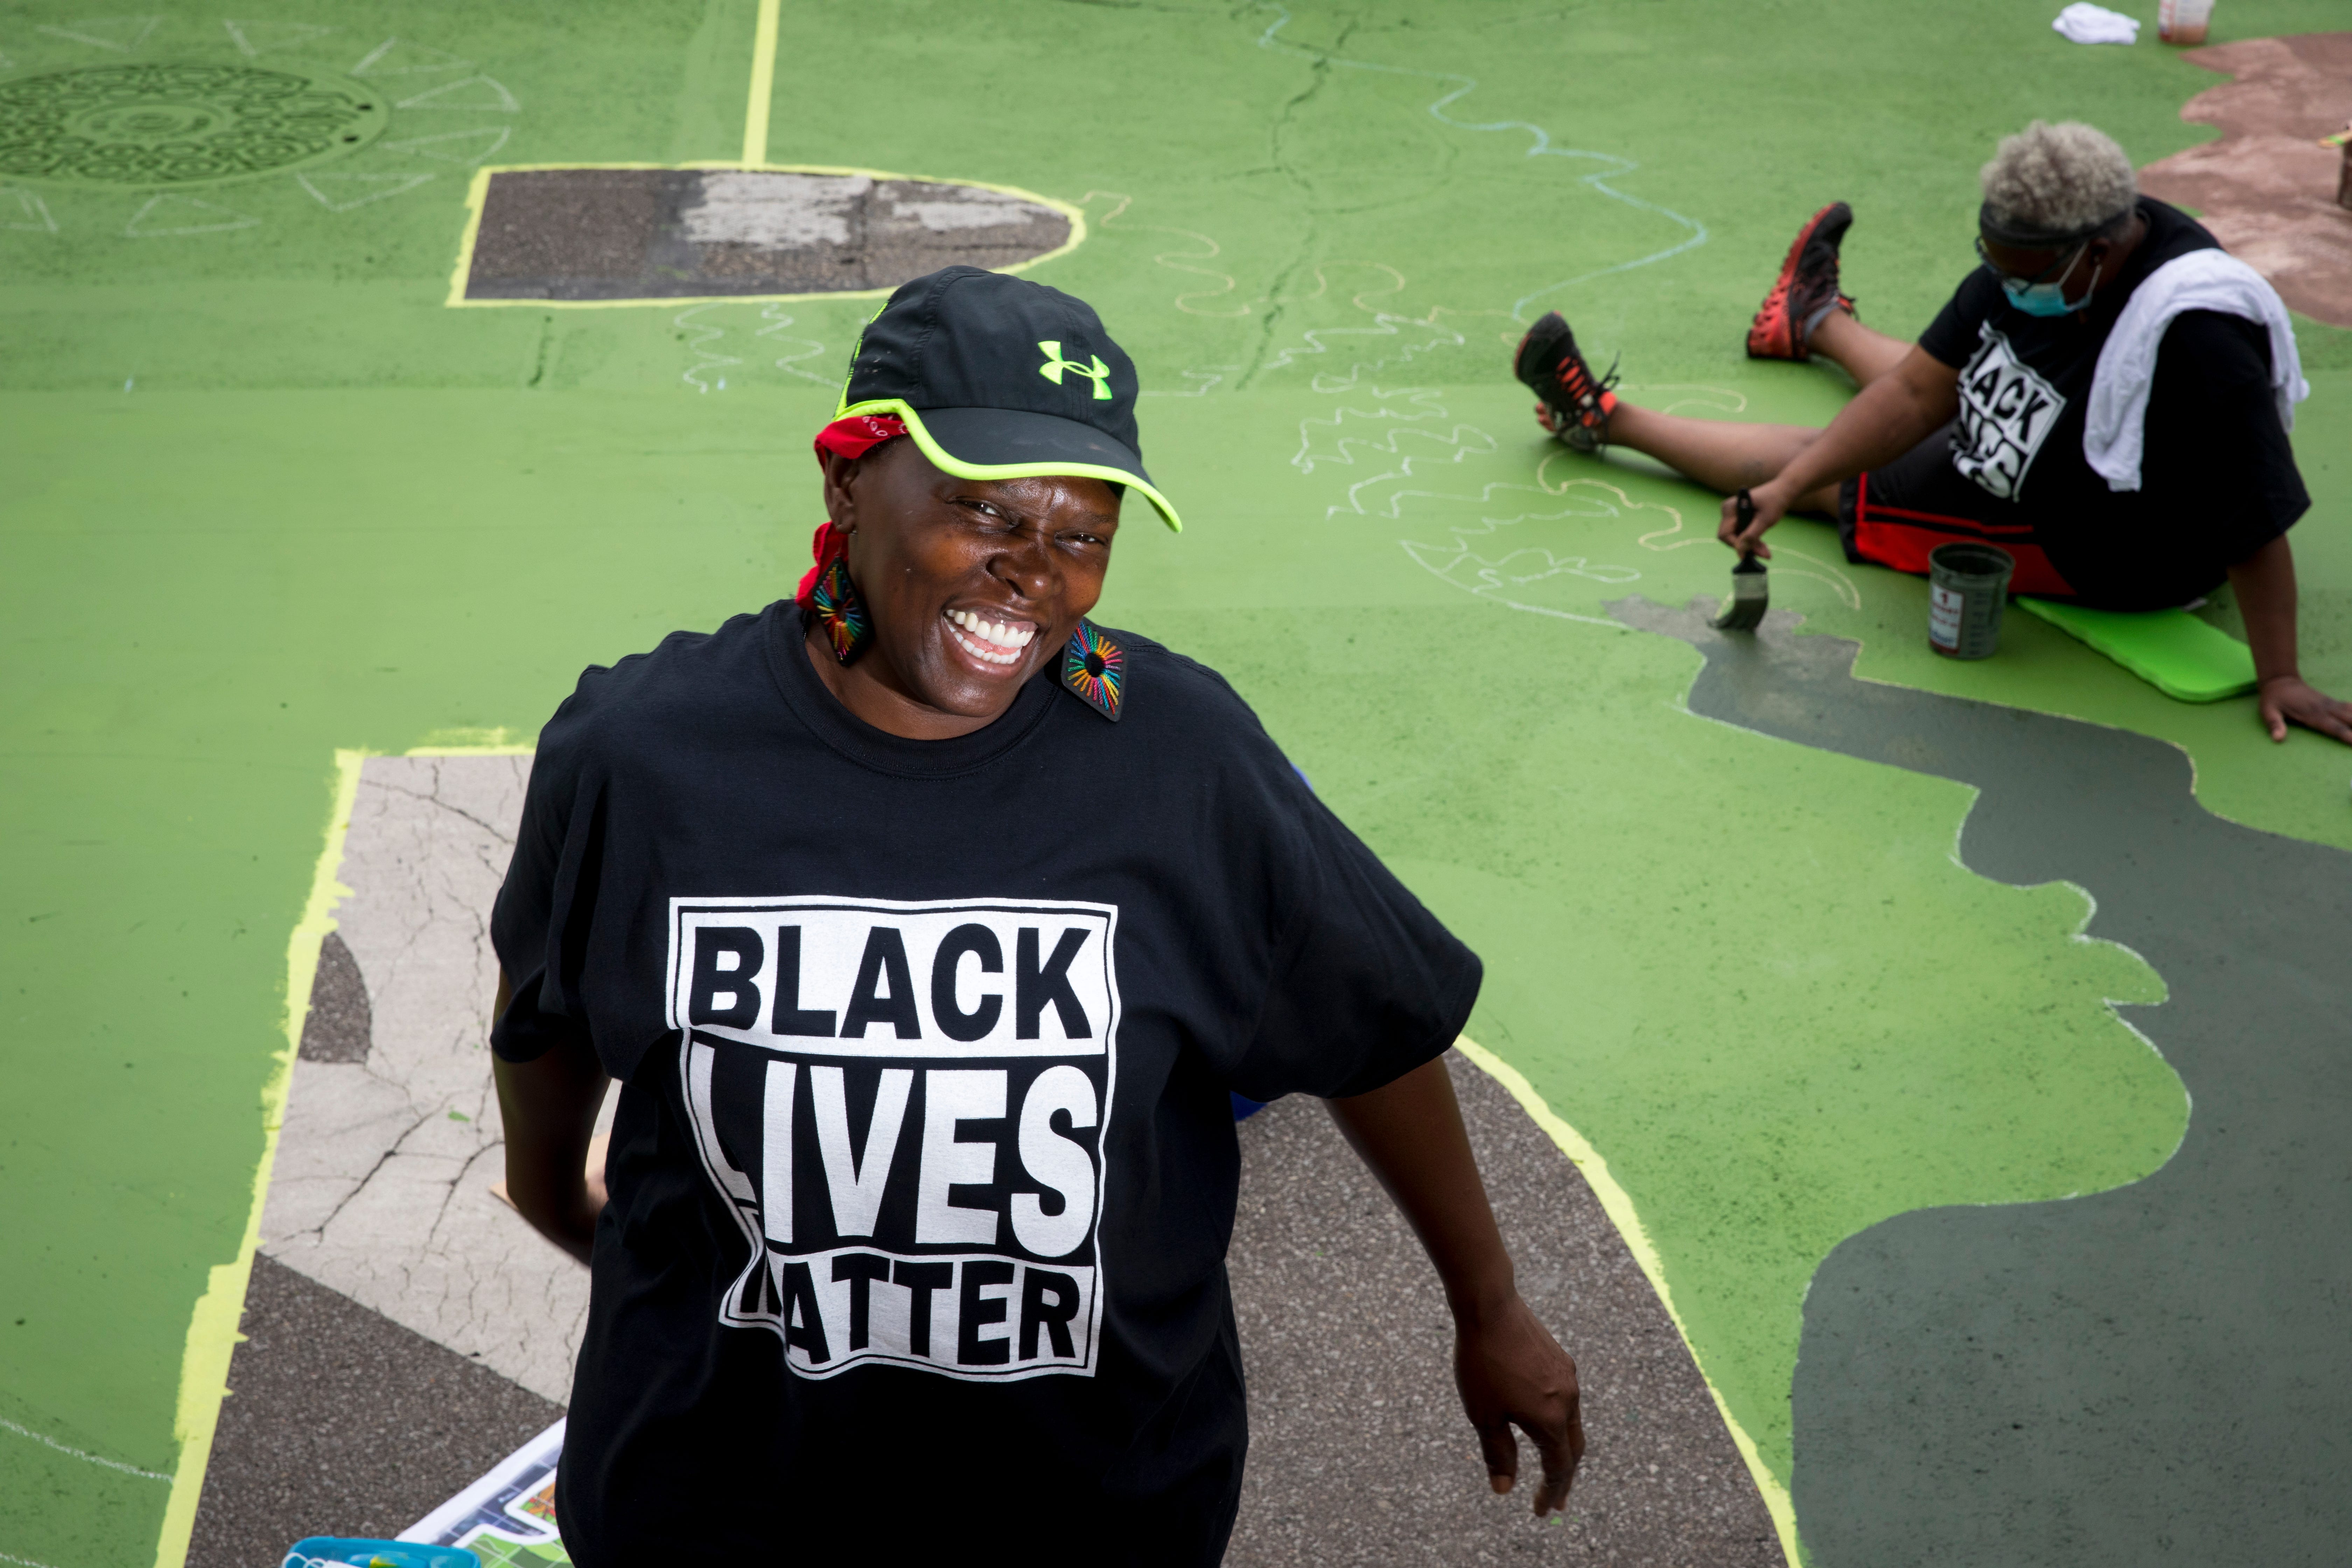 Annie Ruth stands next to the letter "R" that she is creating as part of a bigger mural that reads "Black Lives Matter!" Thursday, June 18, 2020, on Plum Street in front of City Hall in Cincinnati. Seventeen local Black artists were charged with designing and creating a letter to be part of the mural.